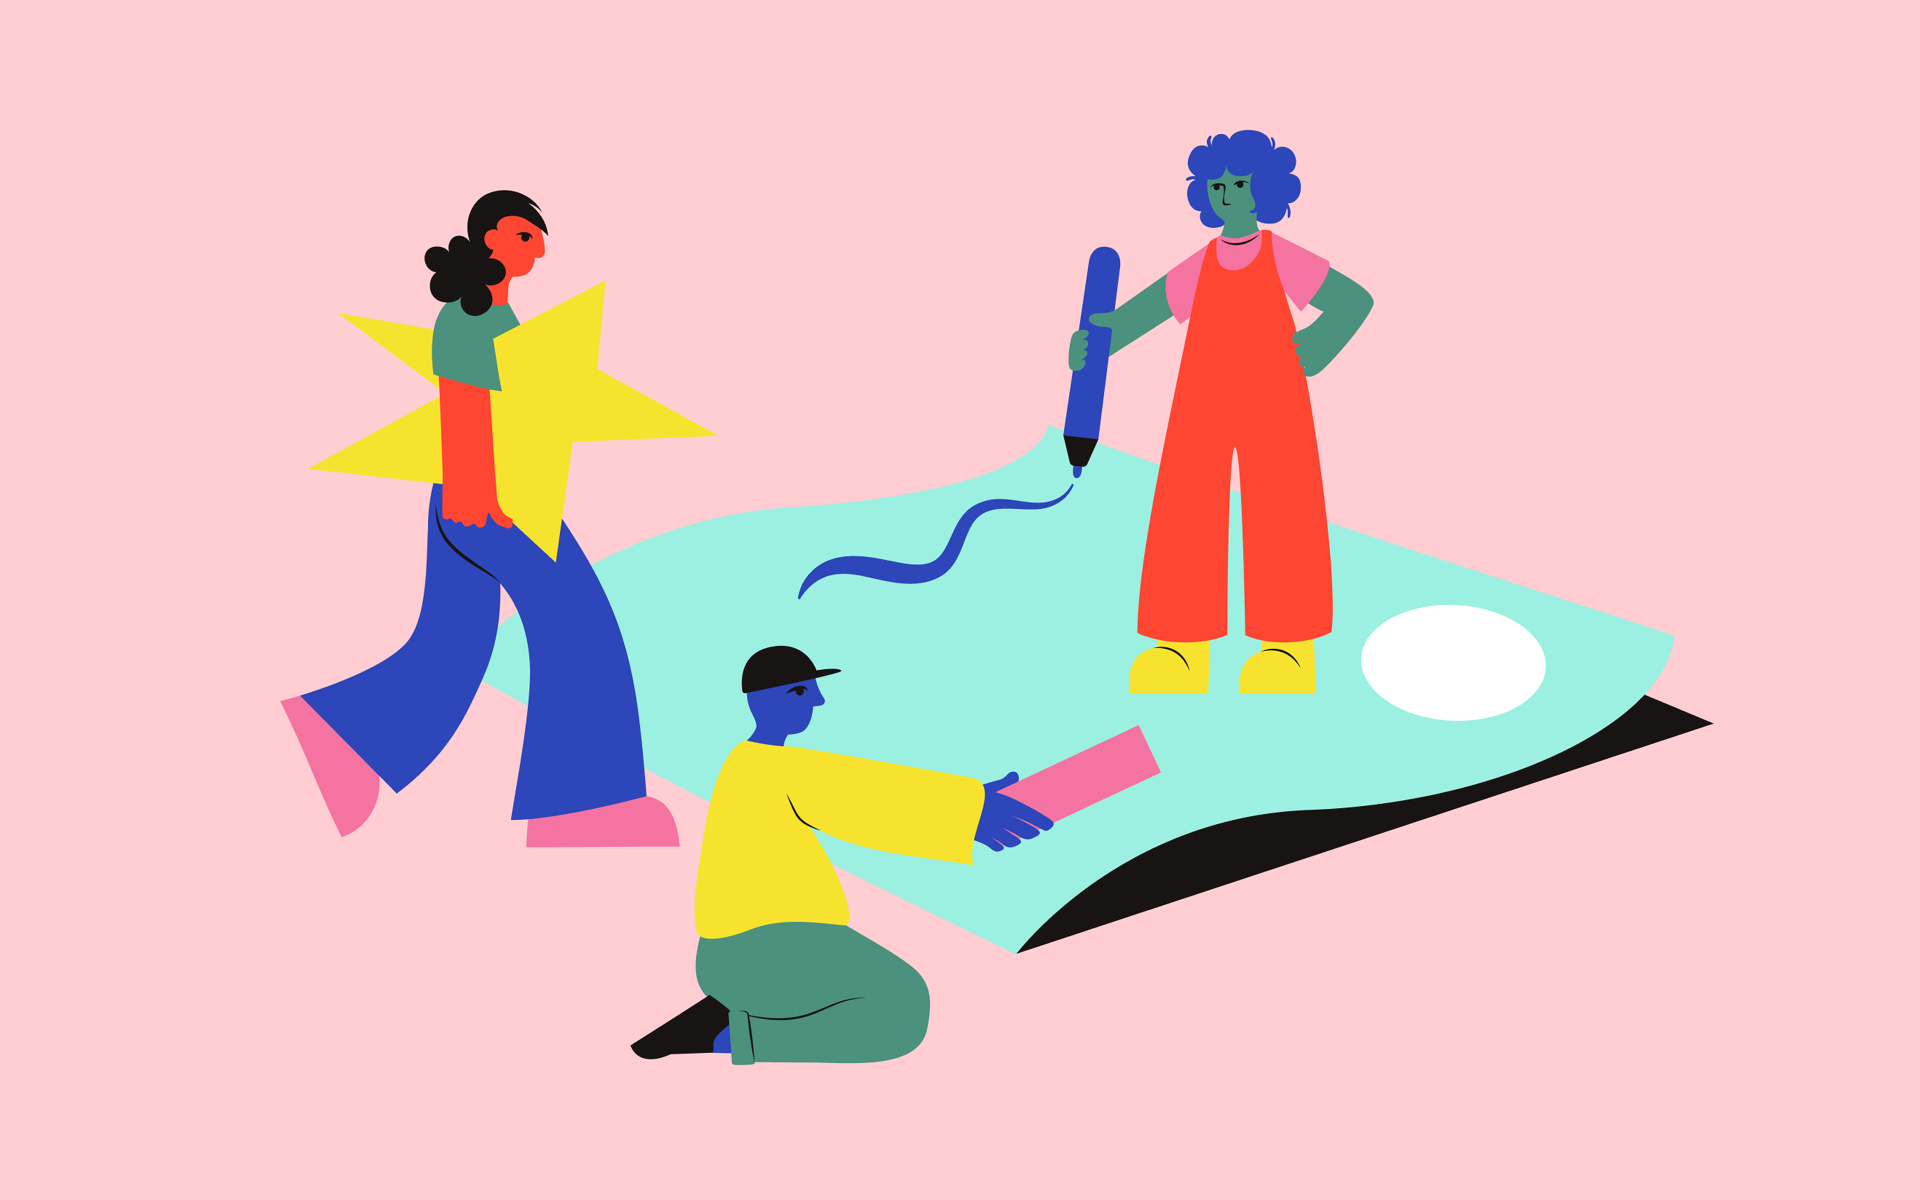 Illustration of collaboration for Spotify Communities